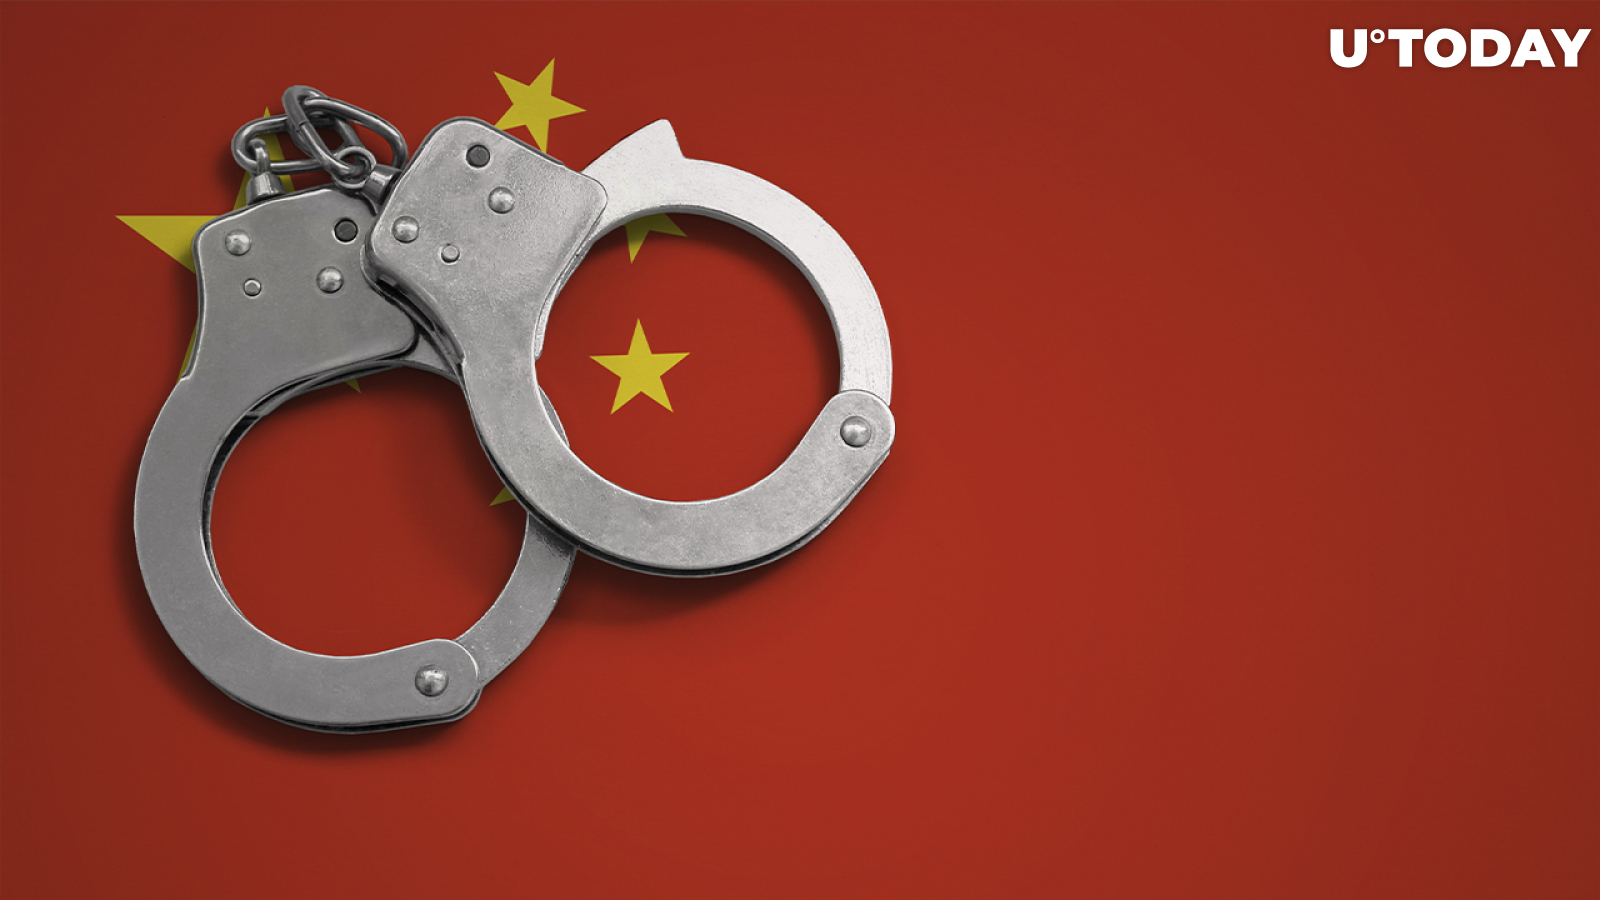 Filecoin Whales Allegedly Arrested in China, Here's Why